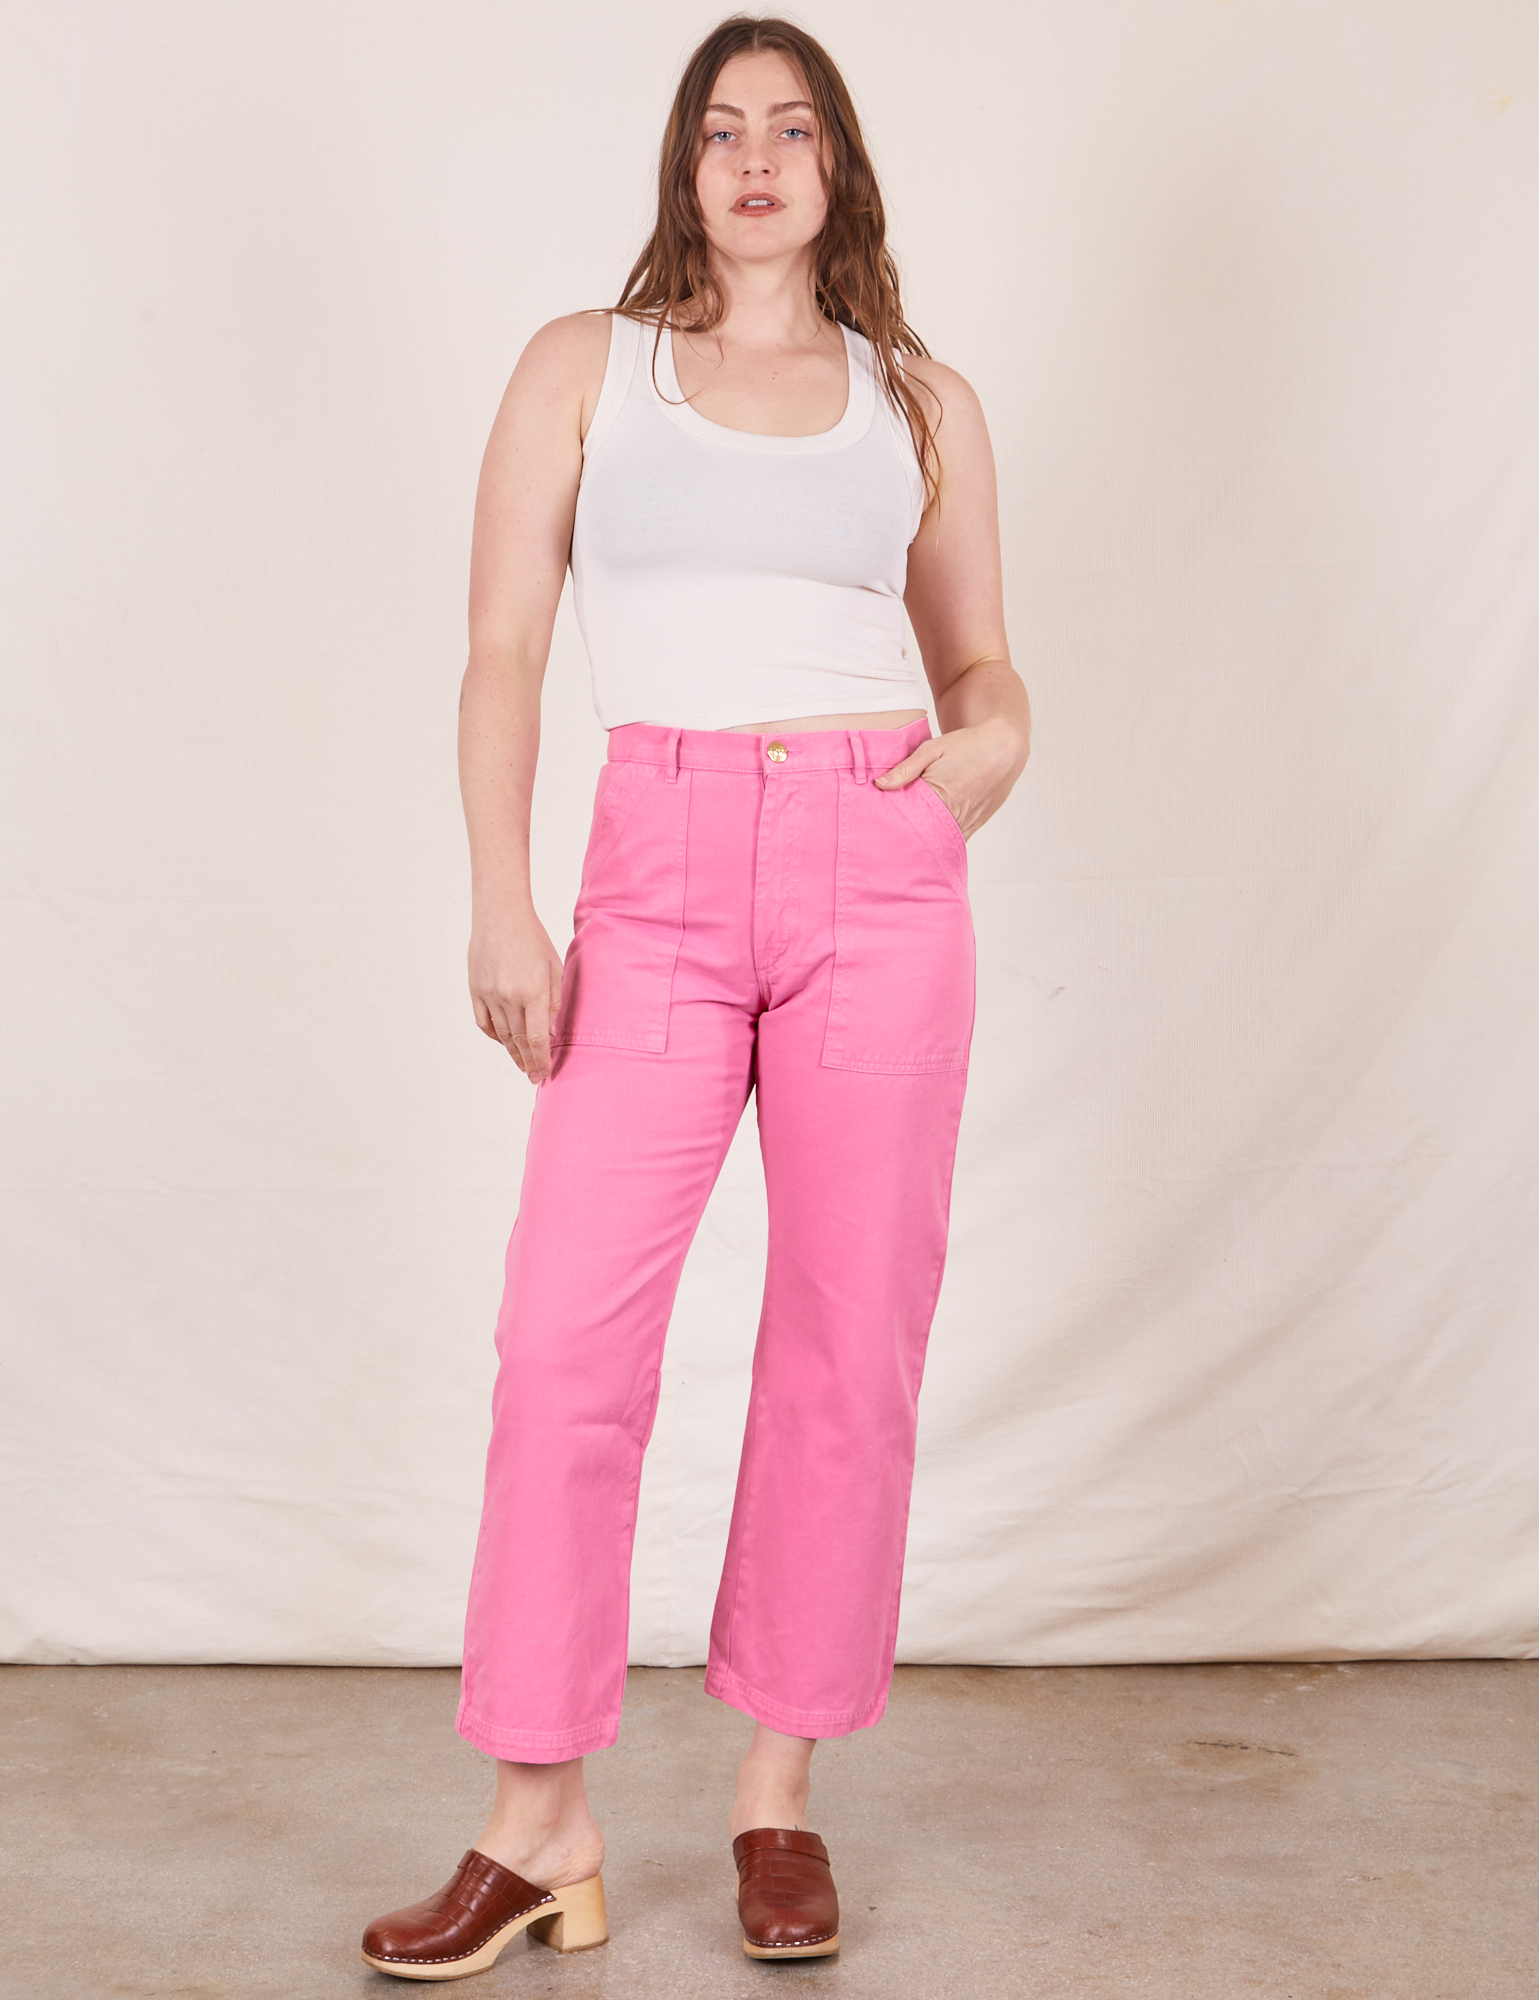 Allison is 5&#39;10&quot; and wearing size S Work Pants in Bubblegum Pink paired with vintage off-white Tank Top